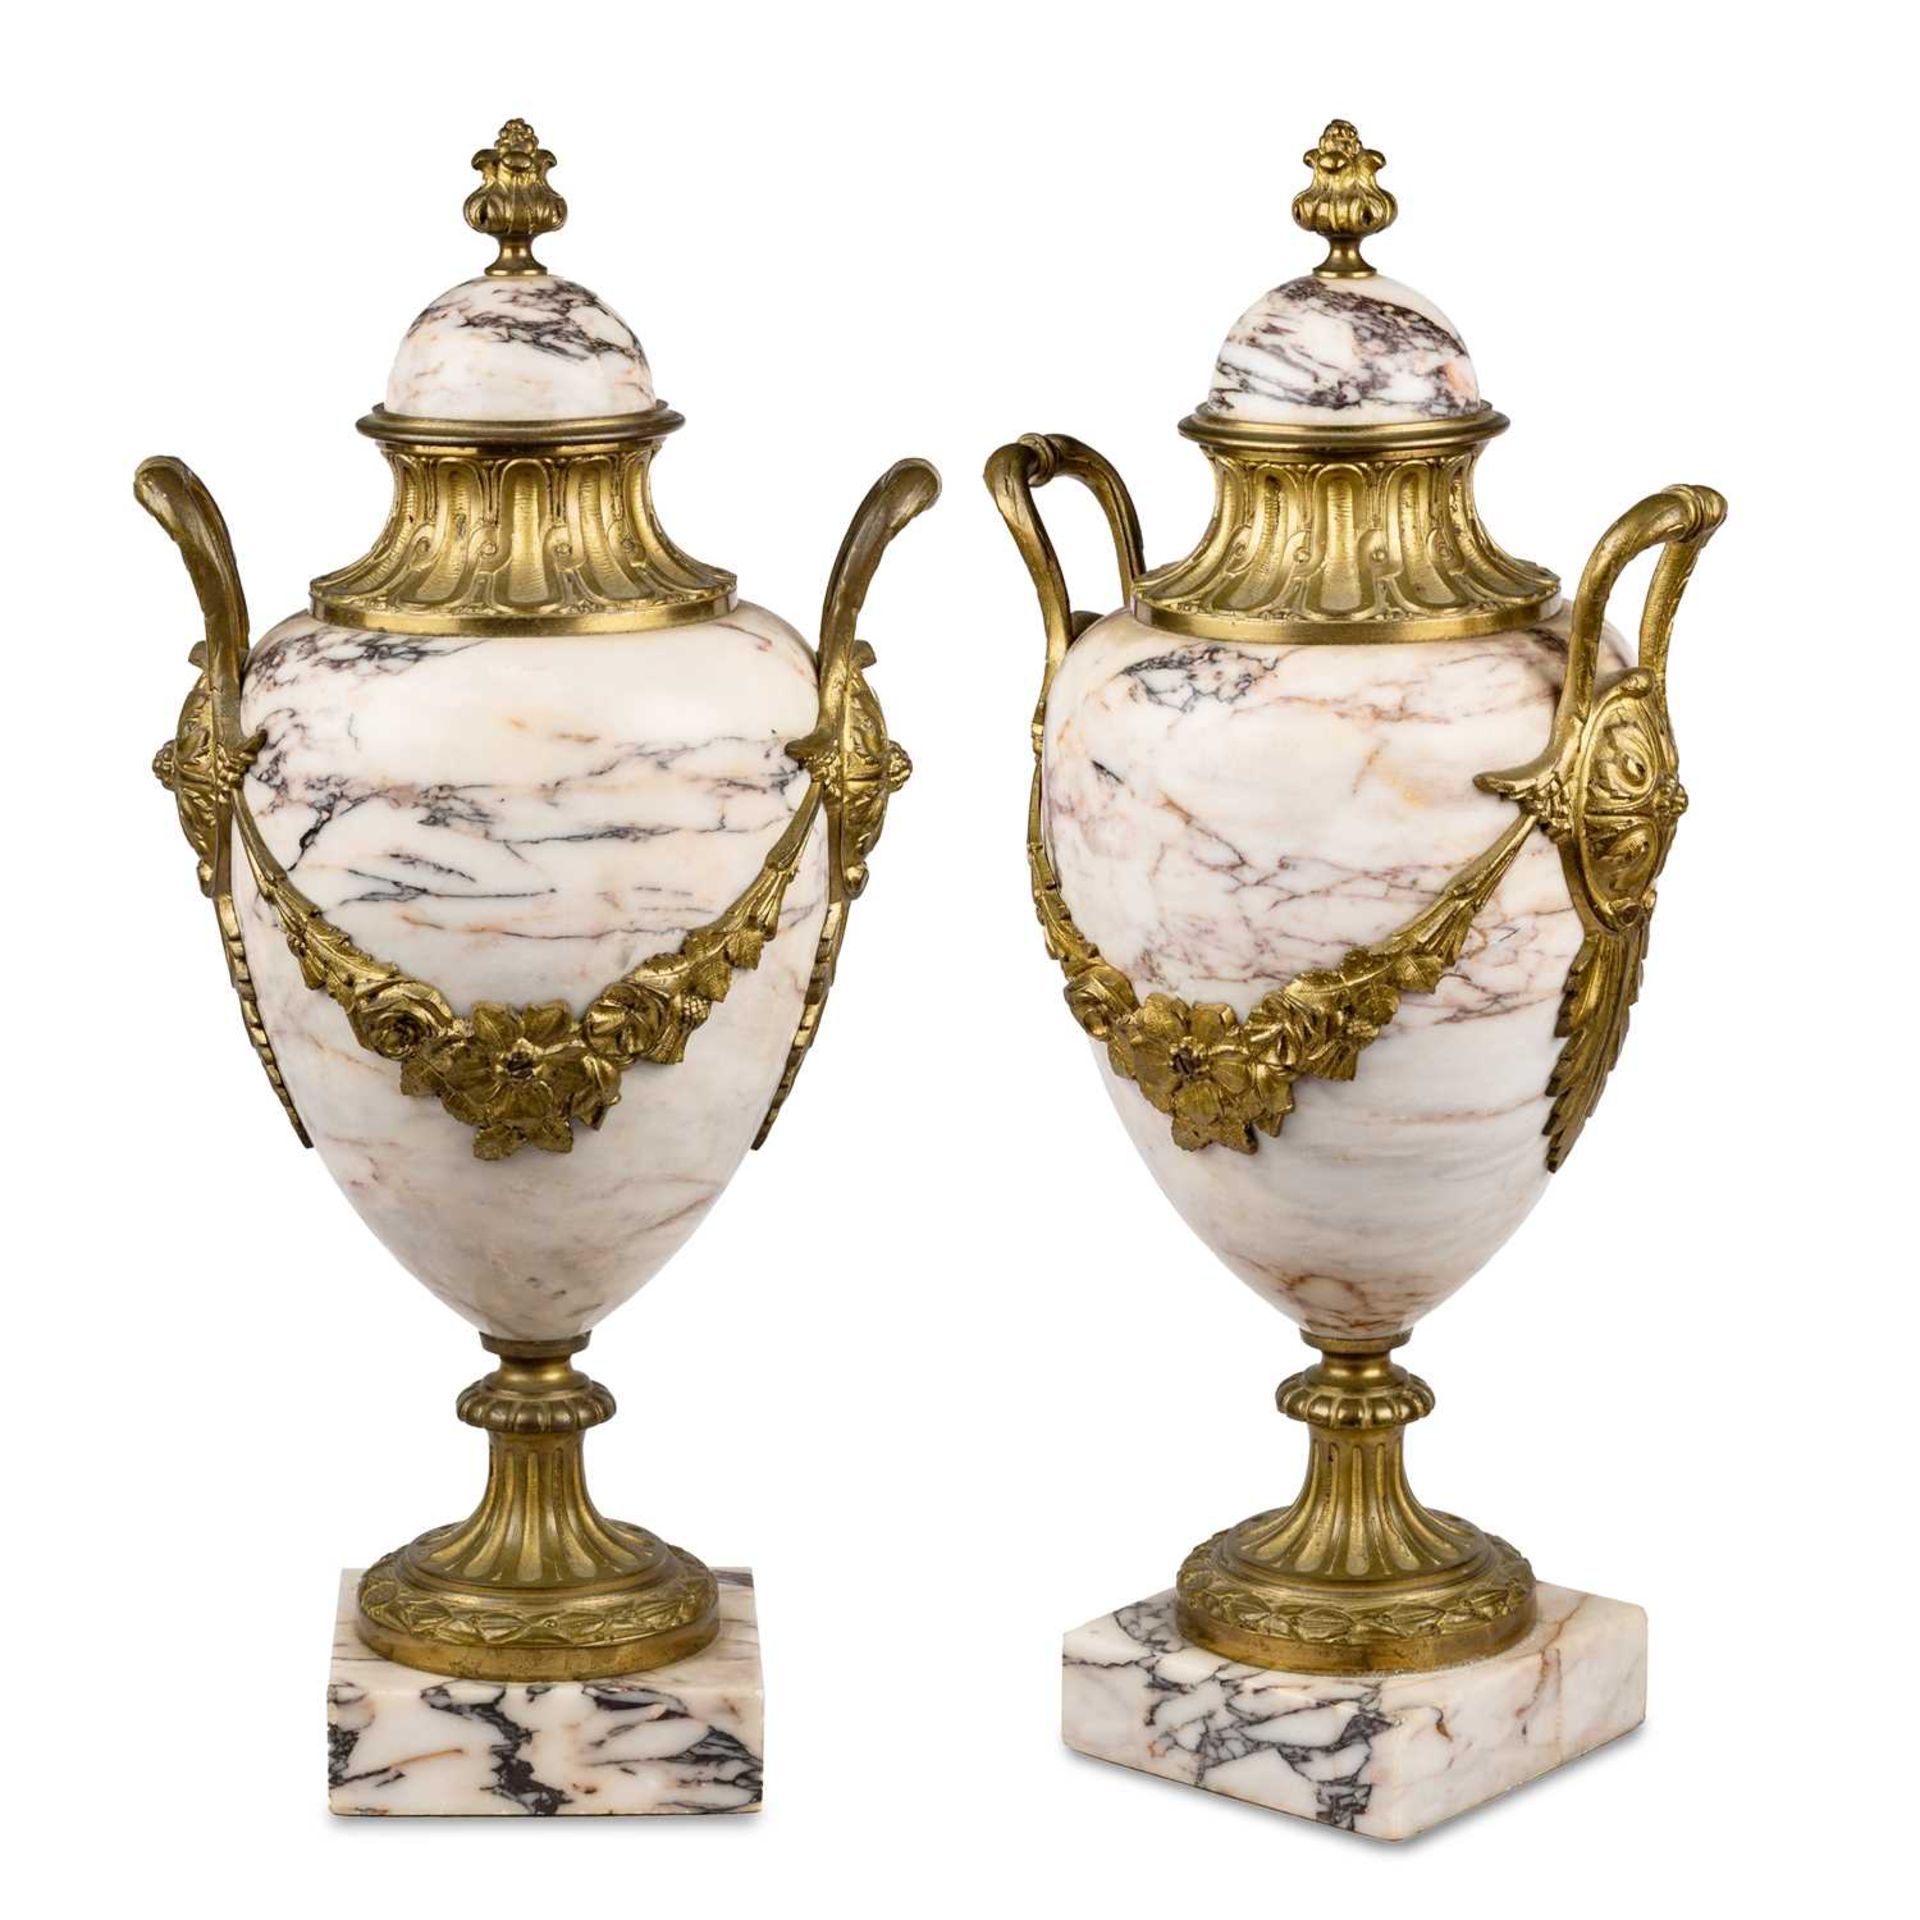 A PAIR OF LOUIS XVI STYLE GILT-BRONZE MOUNTED MARBLE CASSOLETTES, 19TH CENTURY